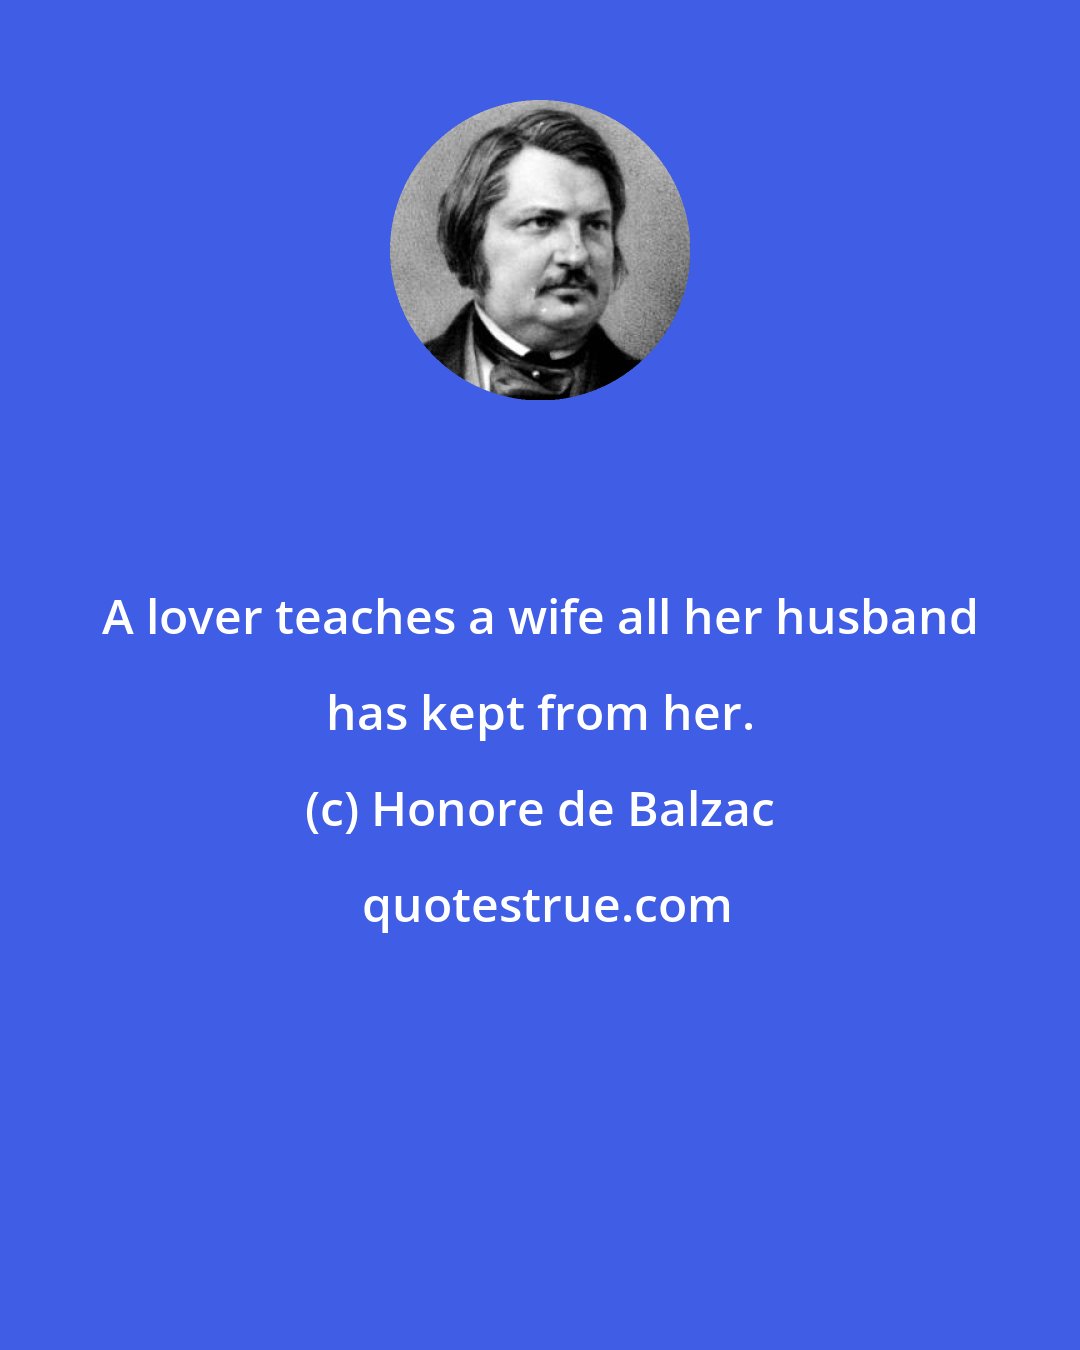 Honore de Balzac: A lover teaches a wife all her husband has kept from her.